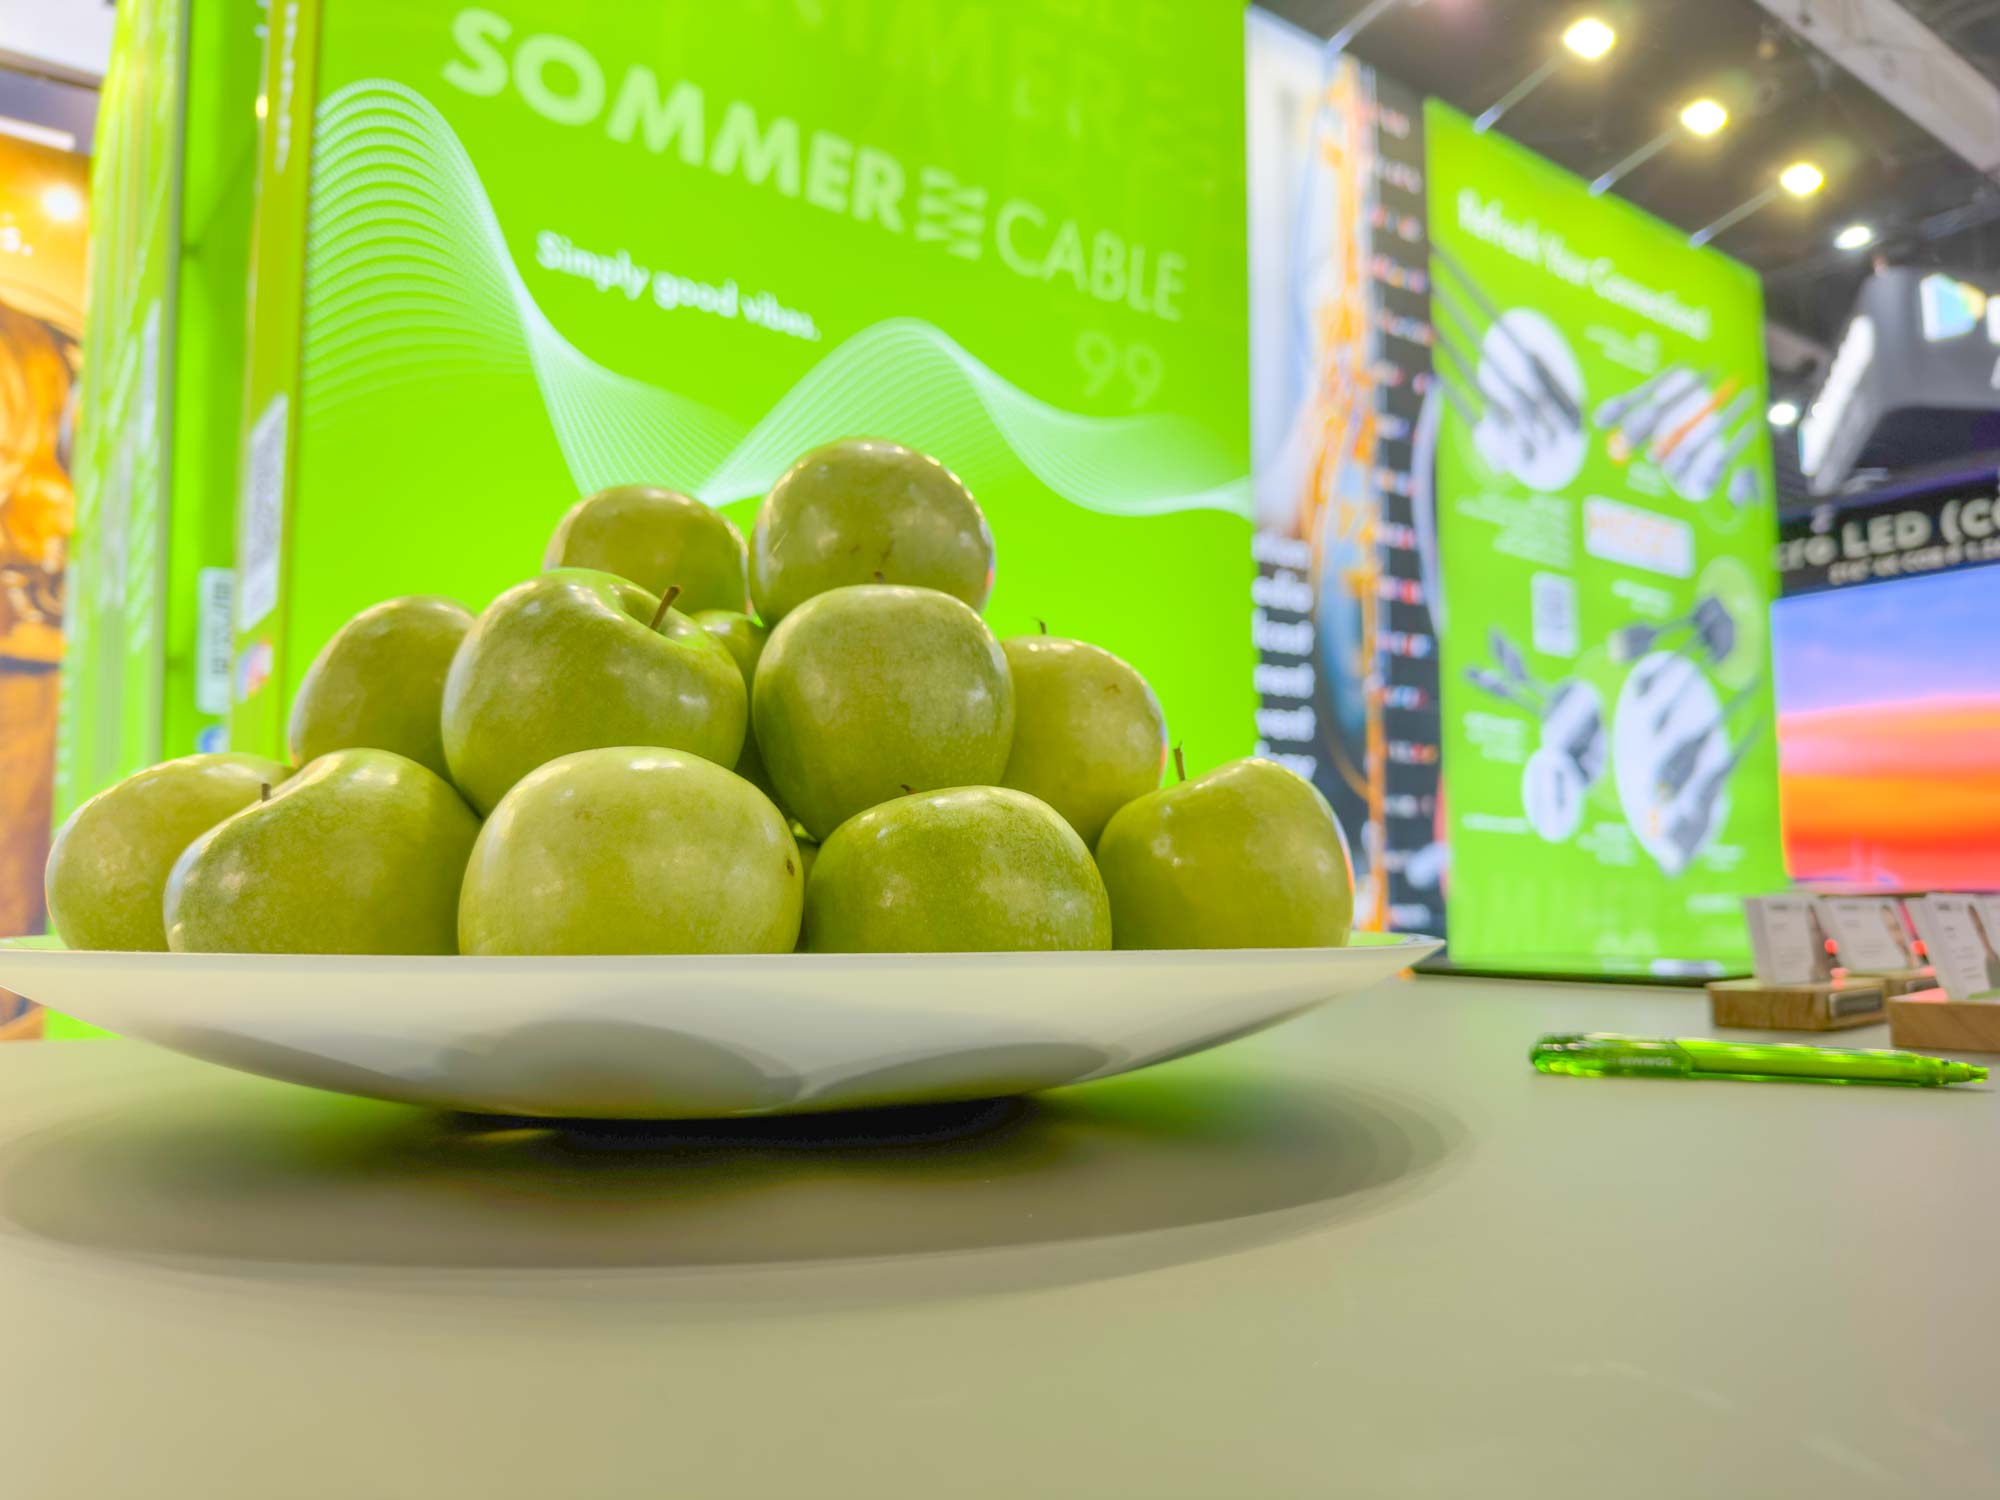 A plate of green apples on a table. In the background you can see our summer cable fair stand.